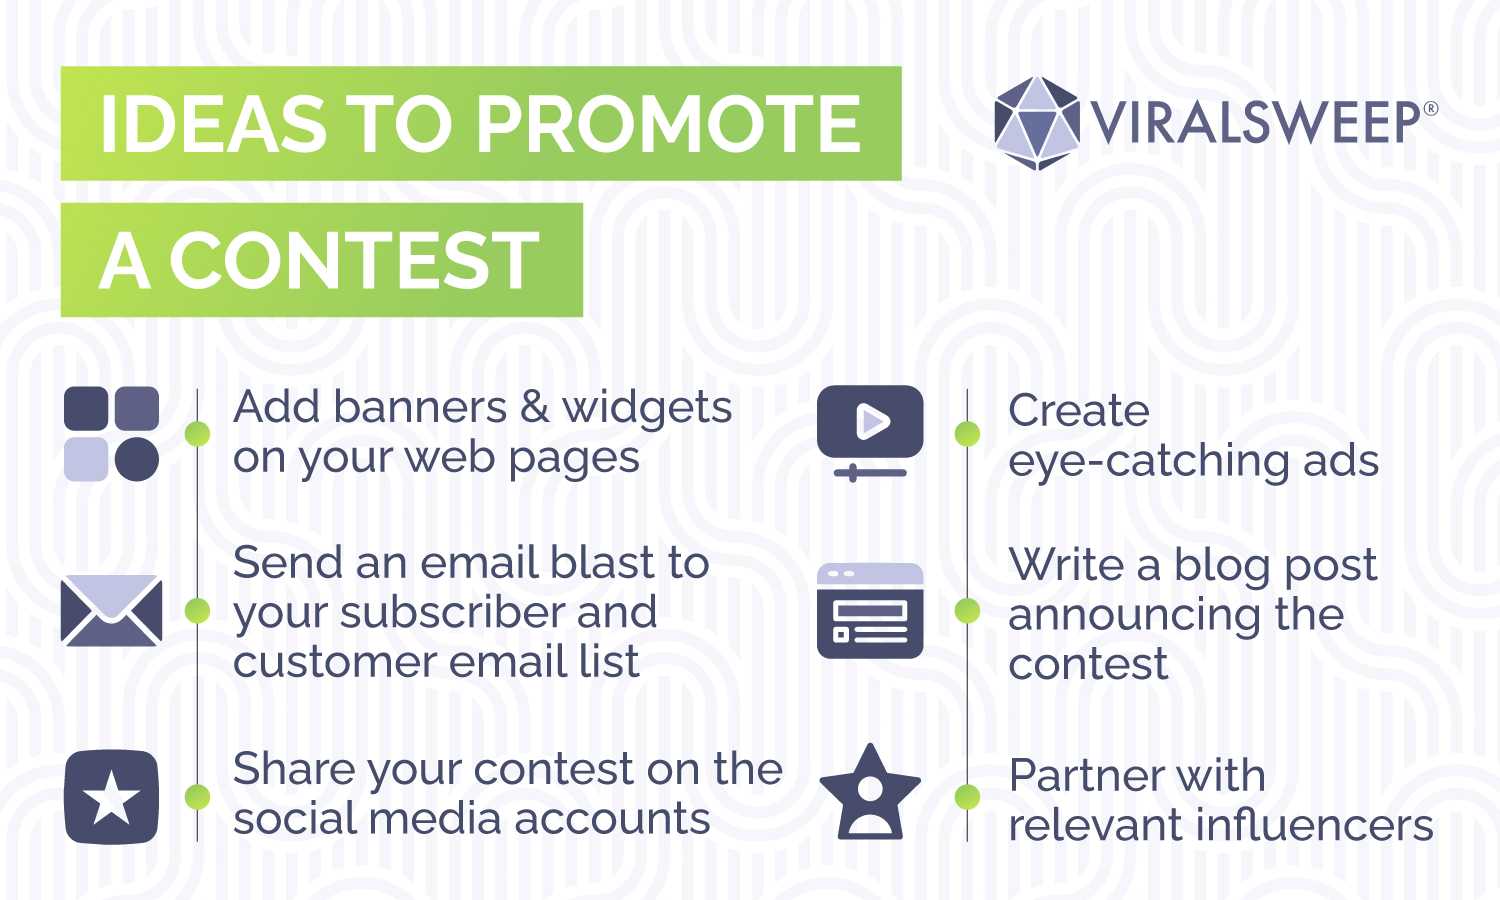 Ideas to promote a contest